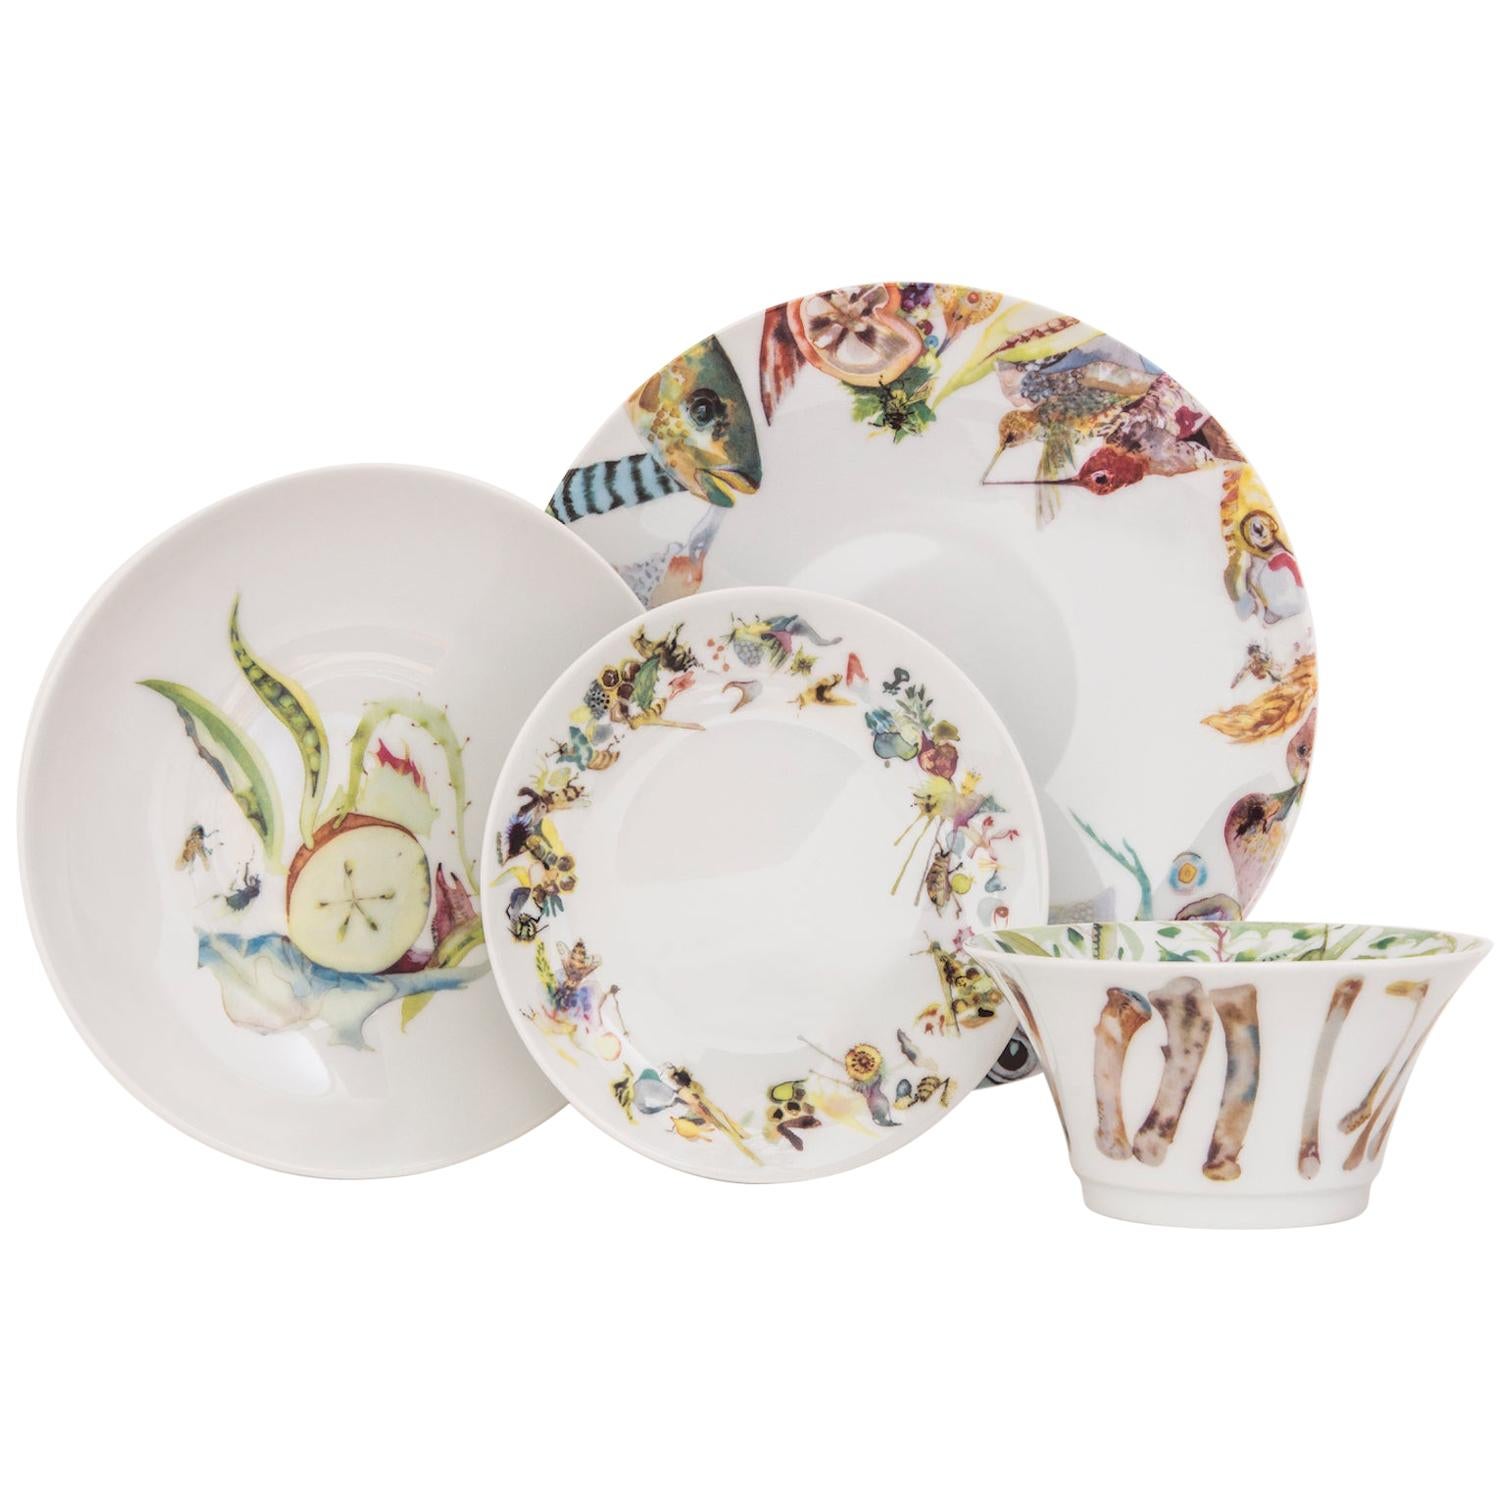 Multicolored French Limoges 4-Piece Porcelain Dinner Setting, Plates and Bowl